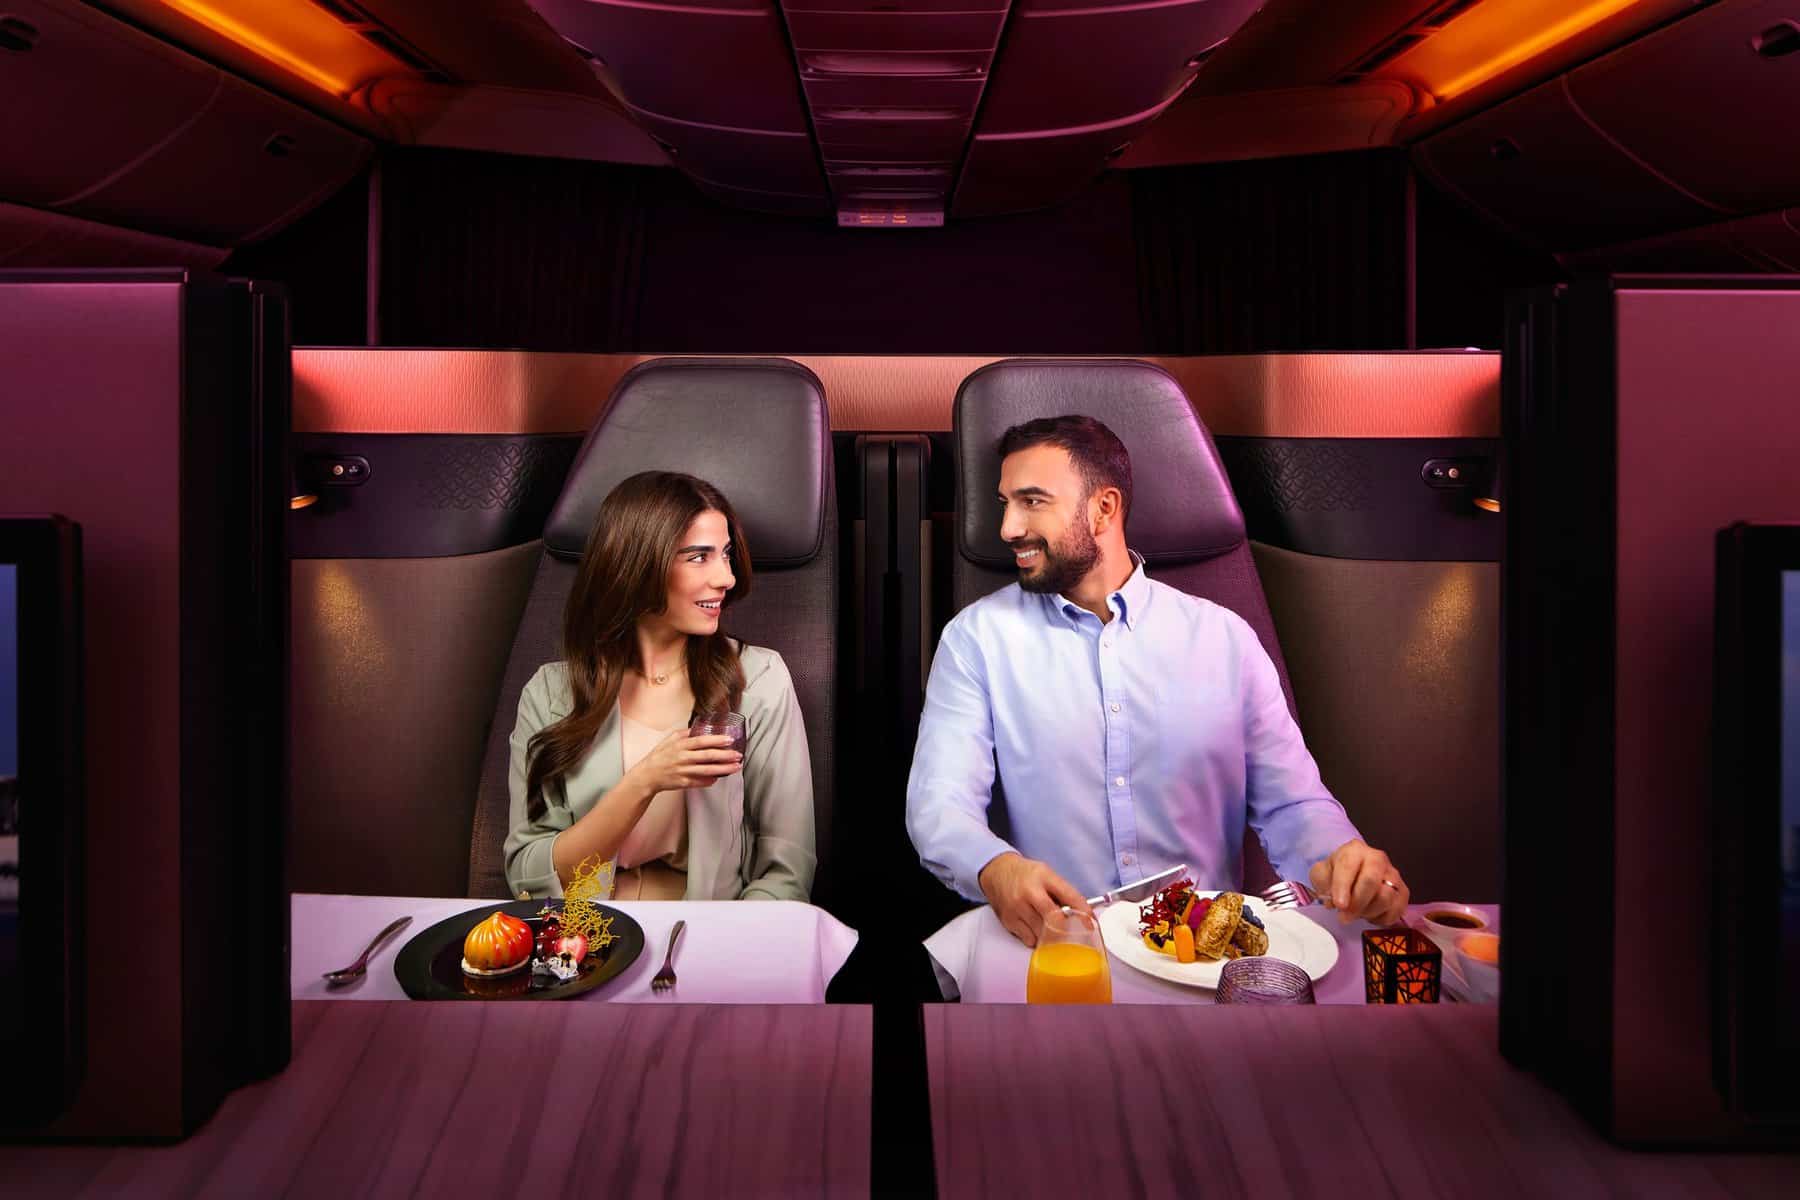 The World's Most Luxurious Airline 2023